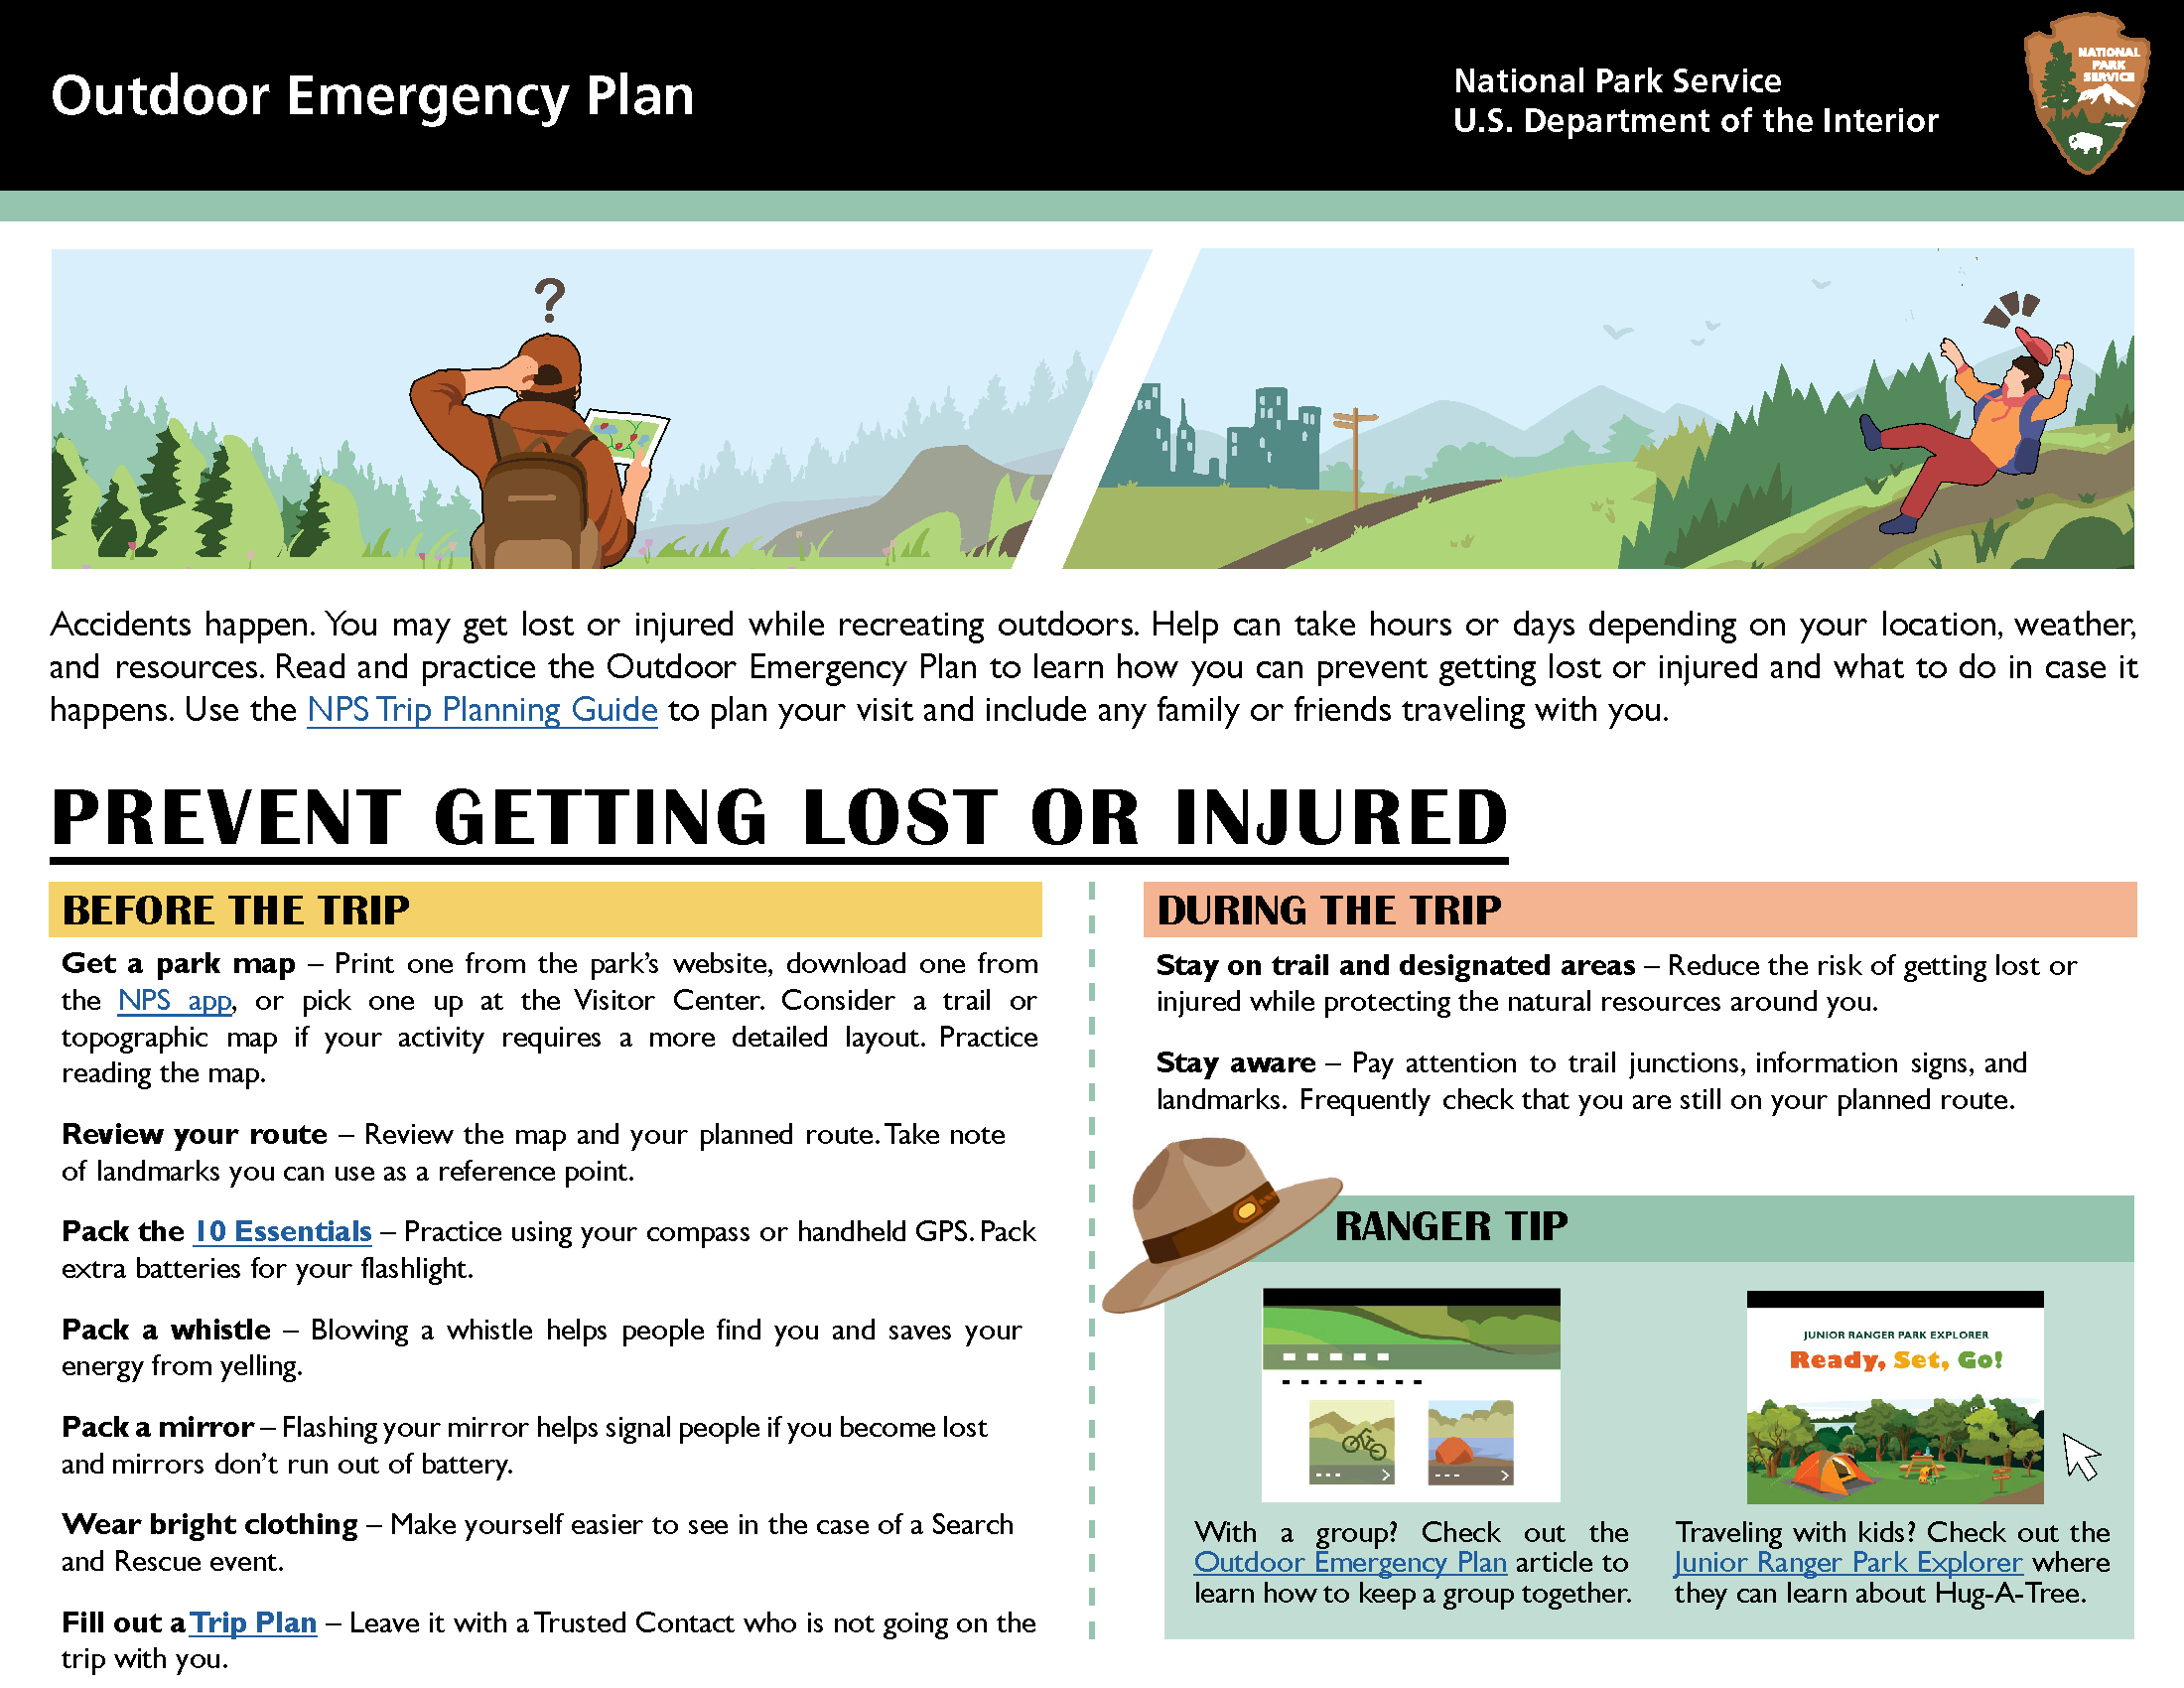 The front page of the NPS Outdoor Emergency Plan